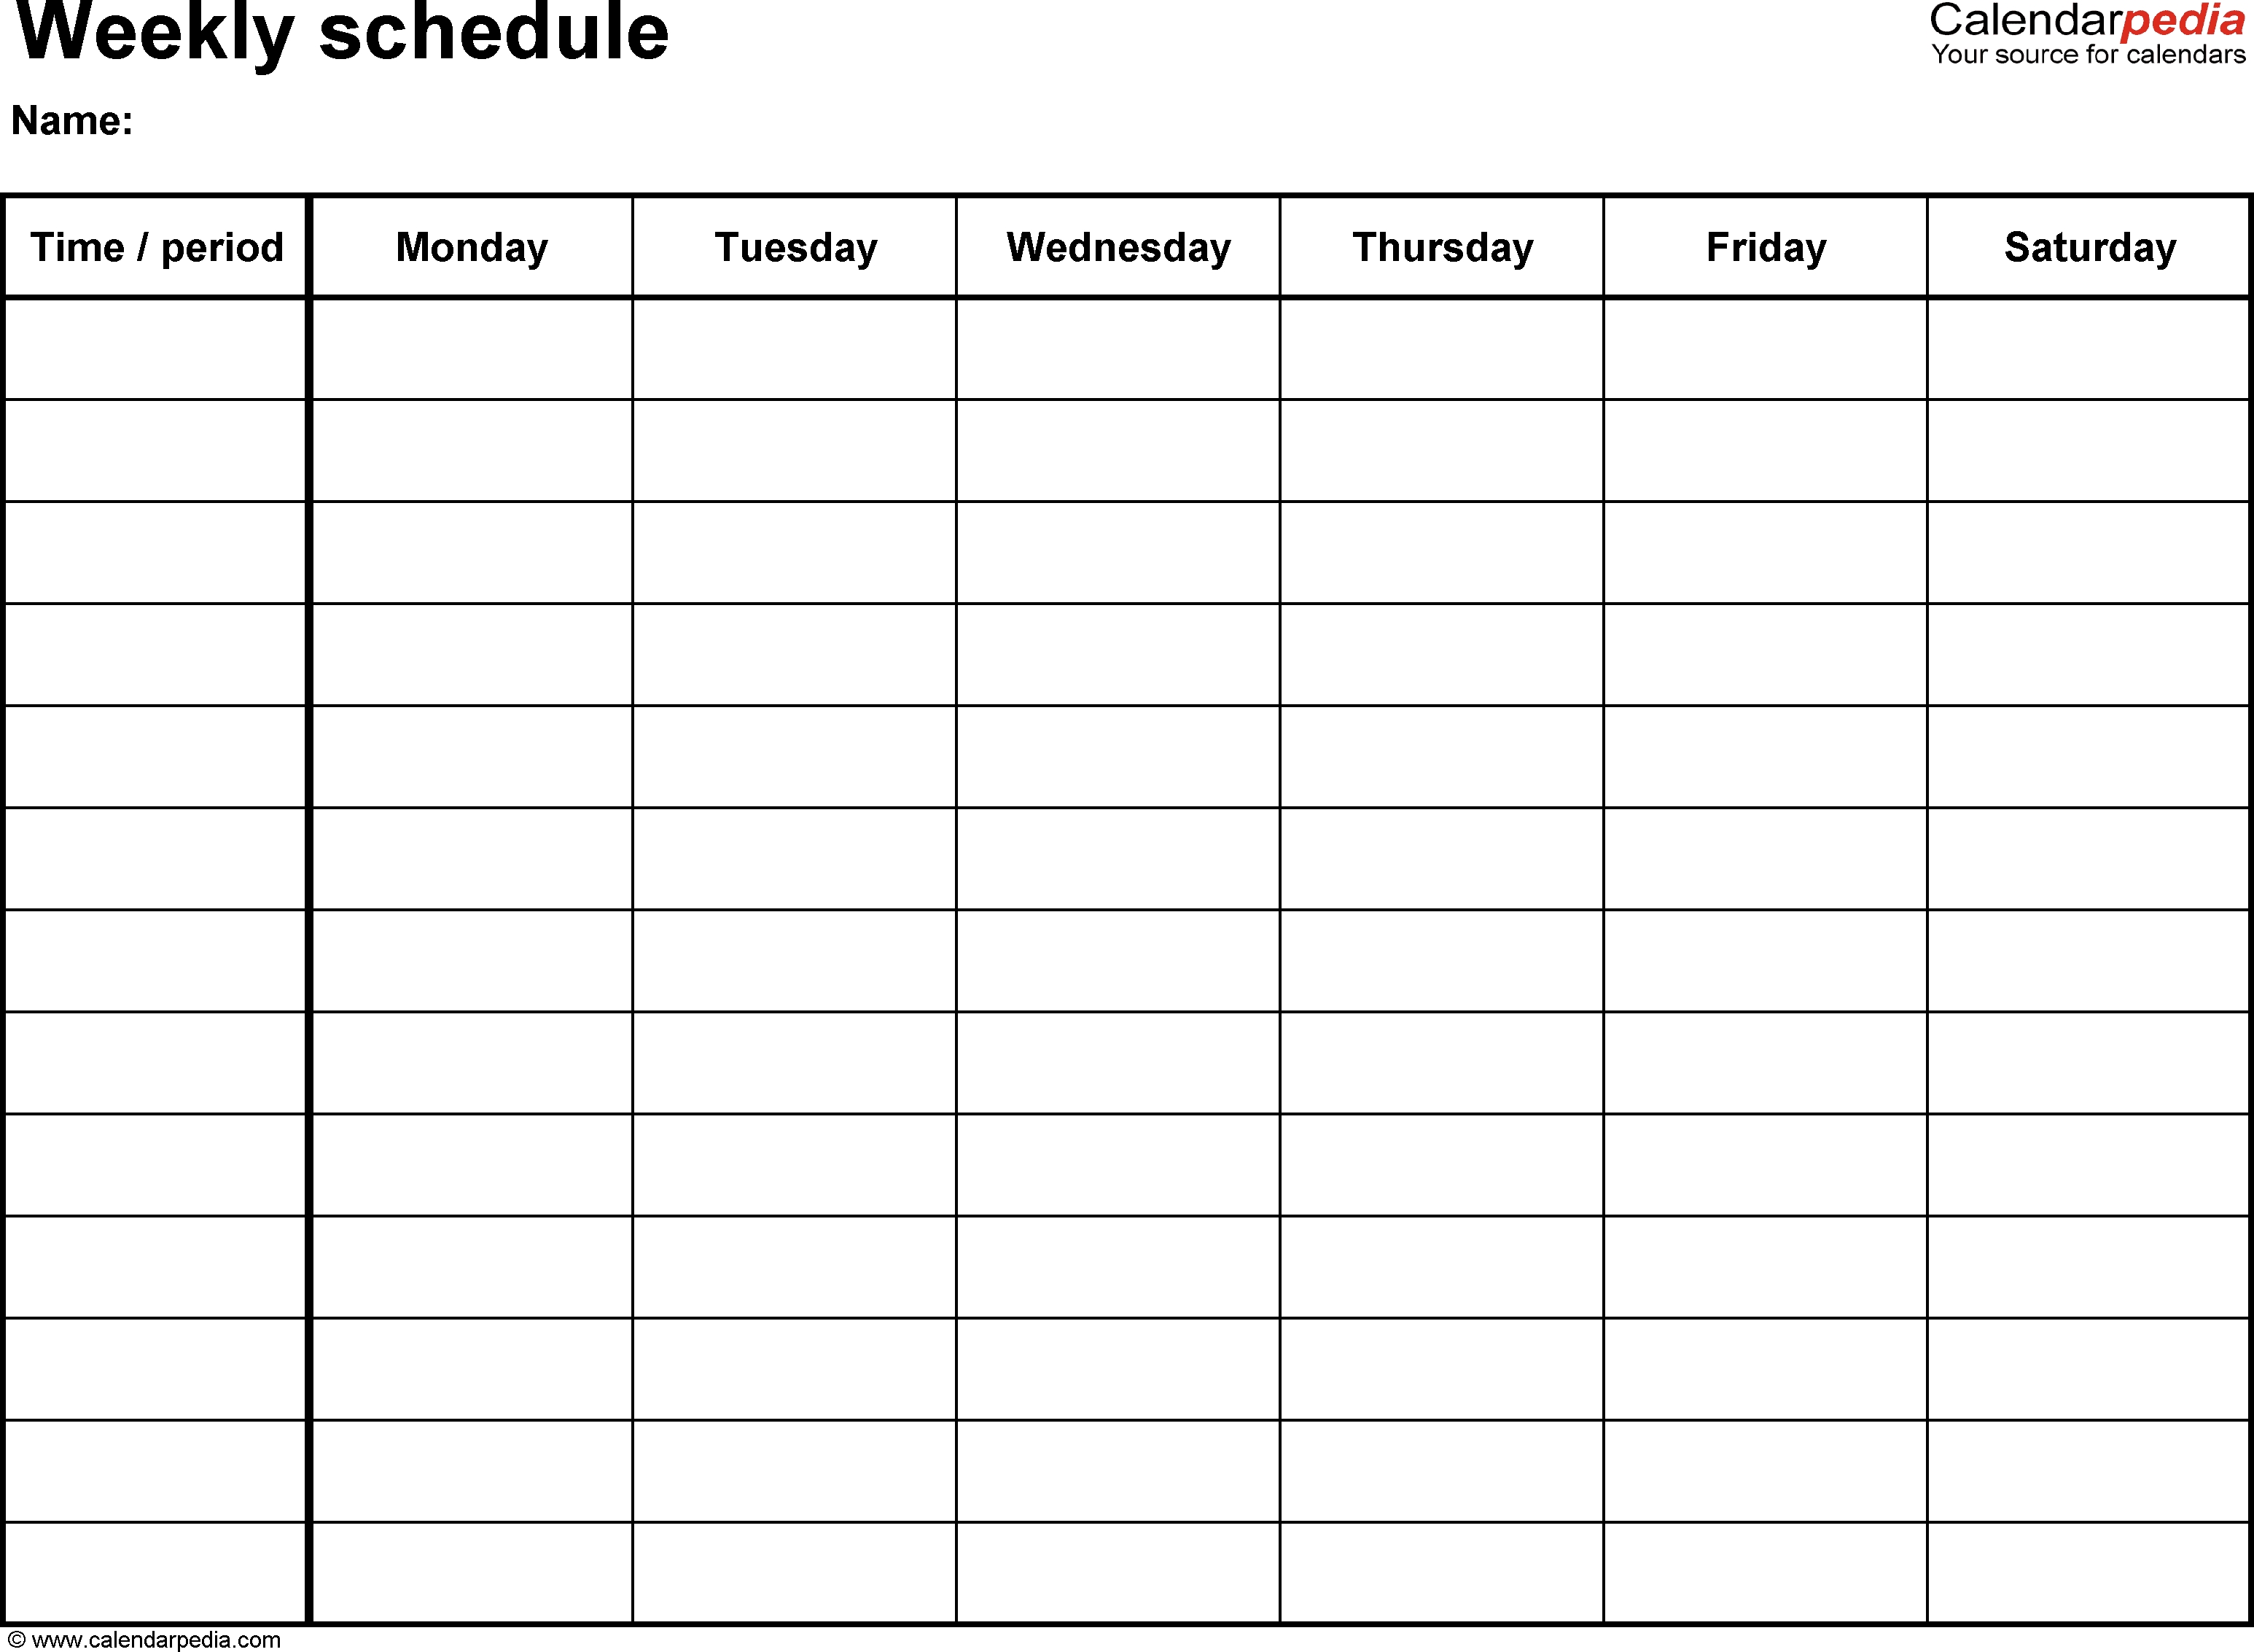 Free Weekly Schedule Templates For Word - 18 Templates Extraordinary Monday To Sunday Calendar To Fiull In